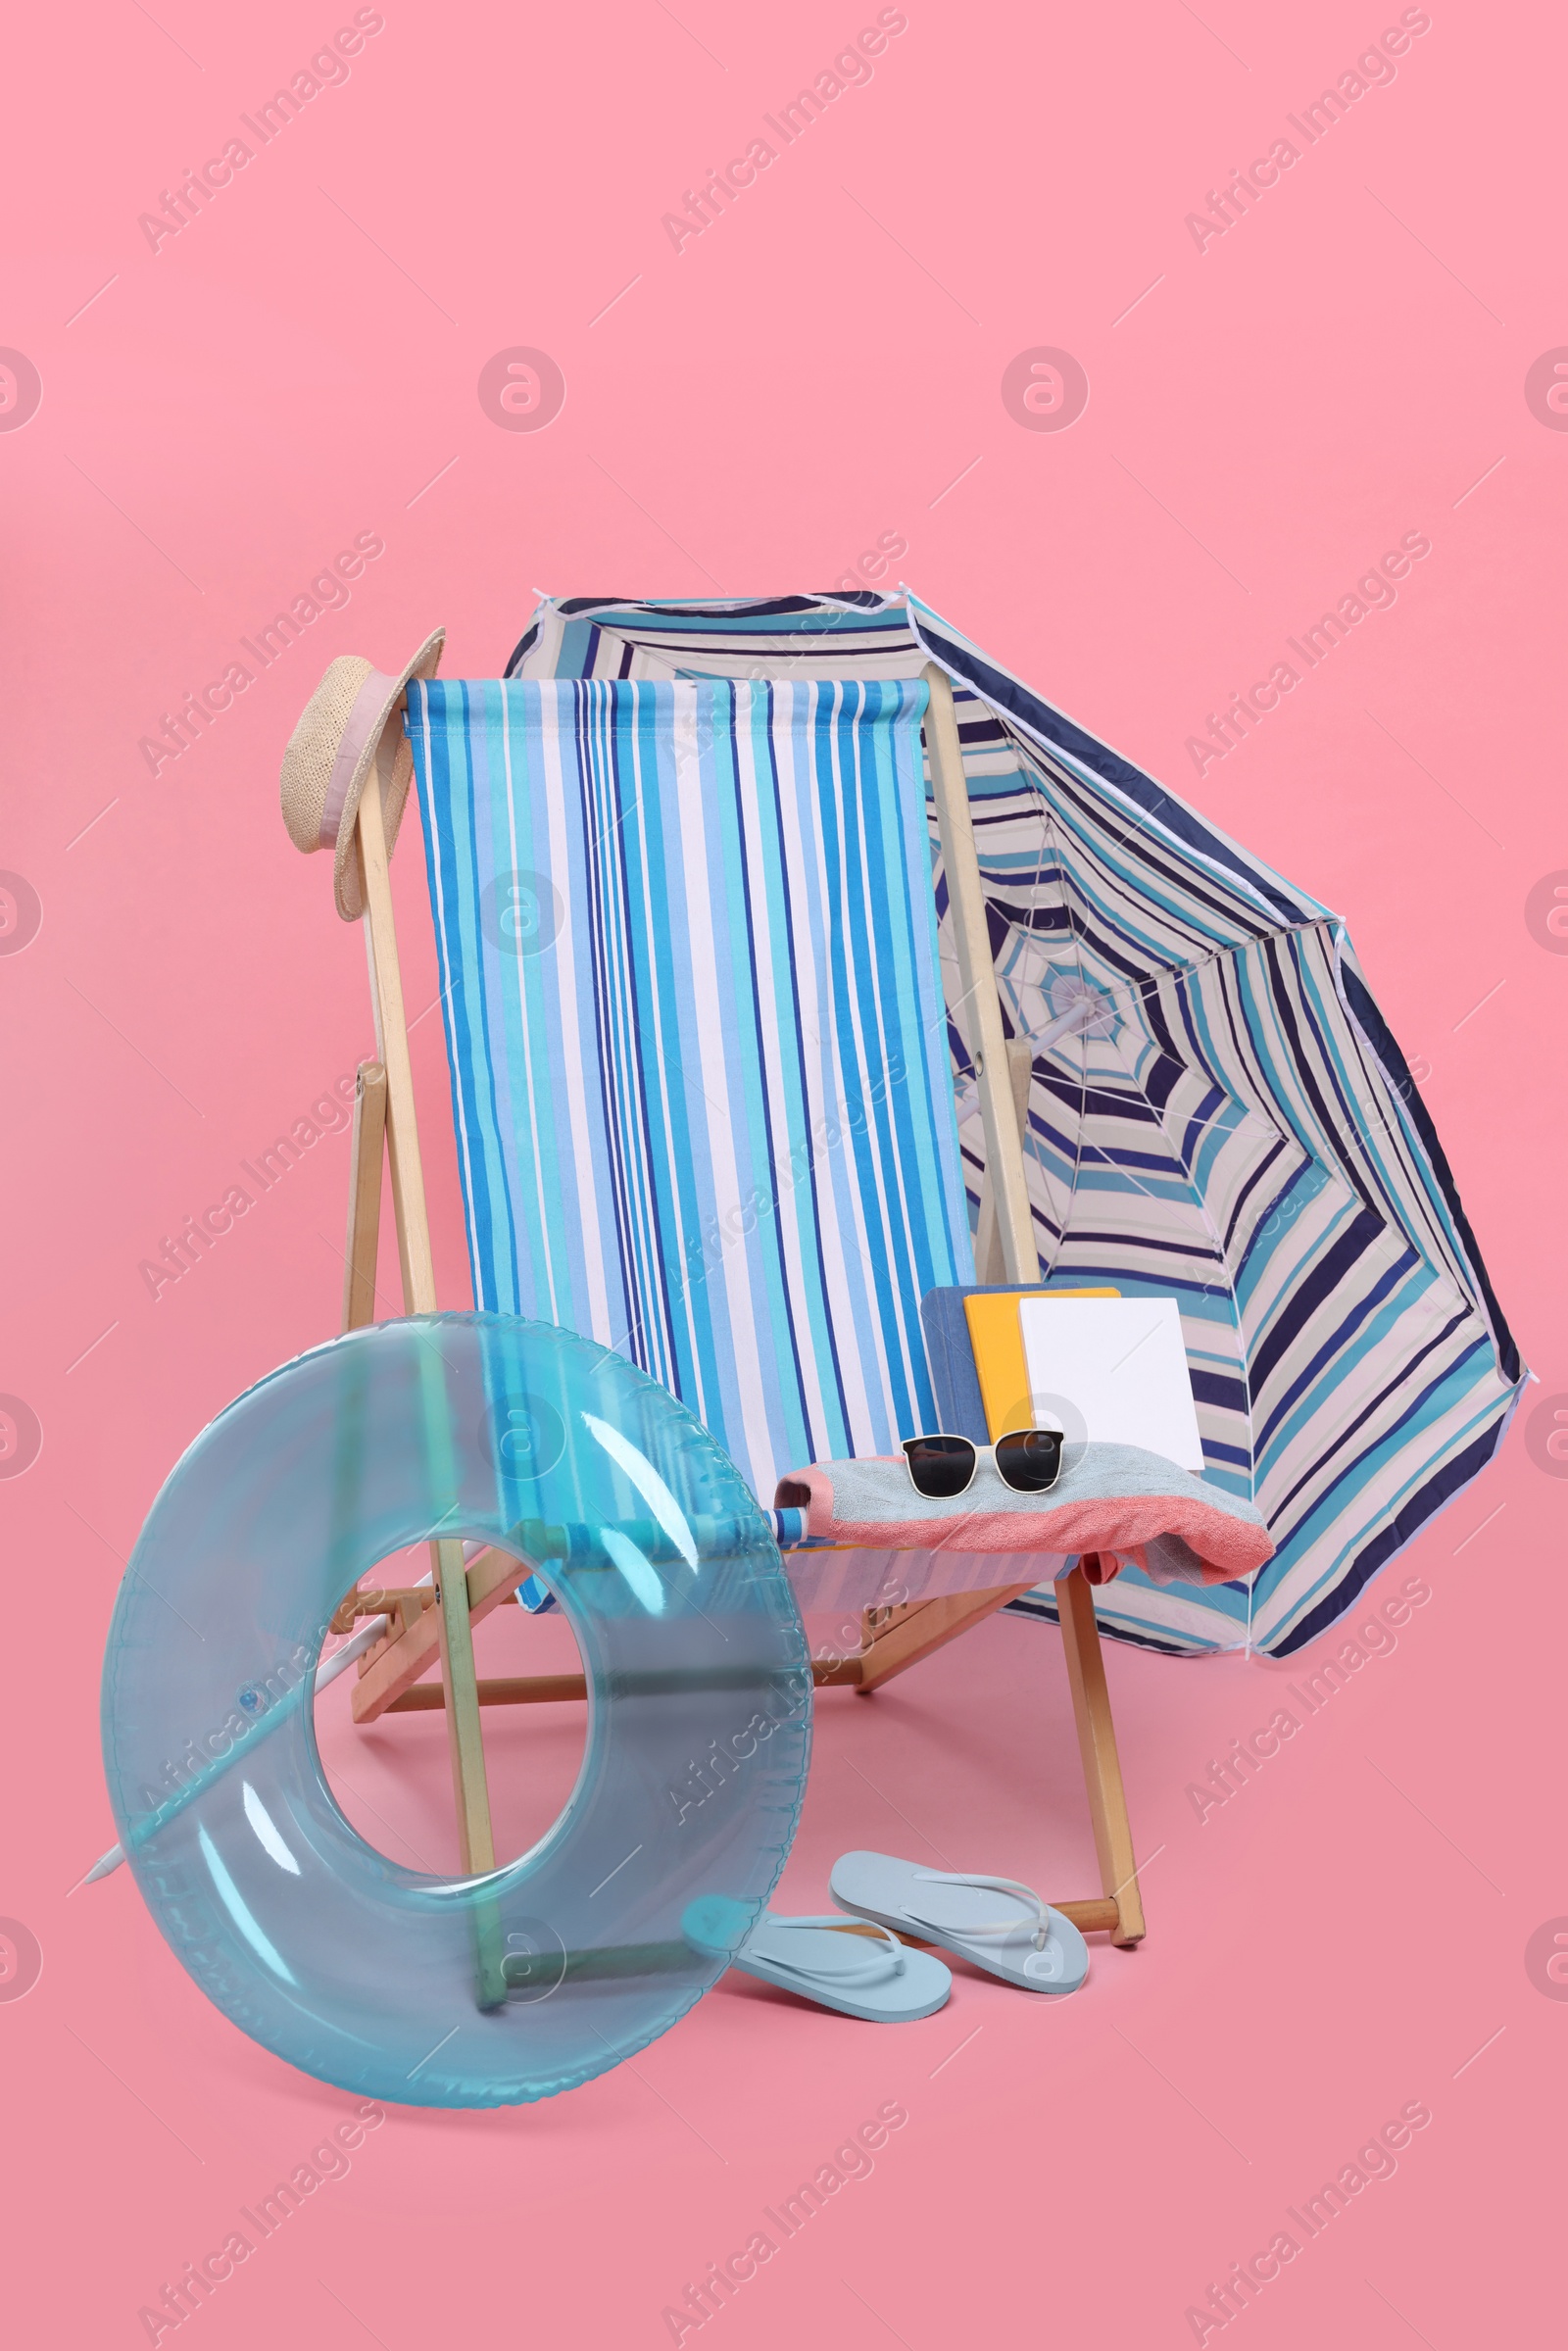 Photo of Deck chair, umbrella and other beach accessories on pink background. Summer vacation